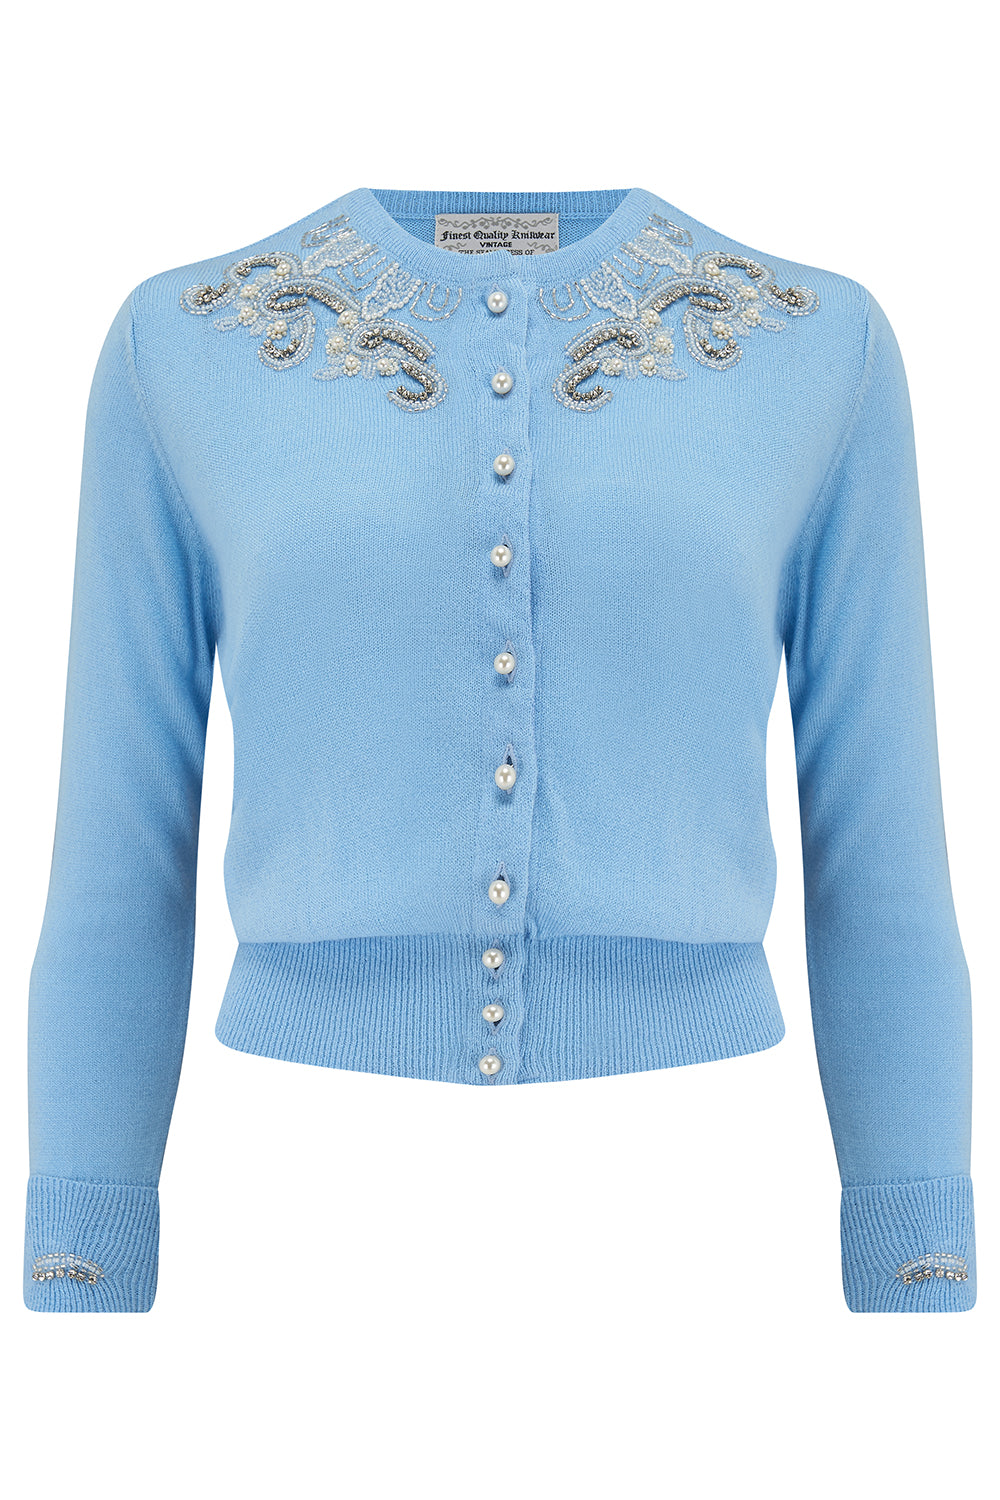 The Beaded Cardigan in Powder Blue, Stunning 1940s Vintage Style - True and authentic vintage style clothing, inspired by the Classic styles of CC41 , WW2 and the fun 1950s RocknRoll era, for everyday wear plus events like Goodwood Revival, Twinwood Festival and Viva Las Vegas Rockabilly Weekend Rock n Romance The Seamstress Of Bloomsbury